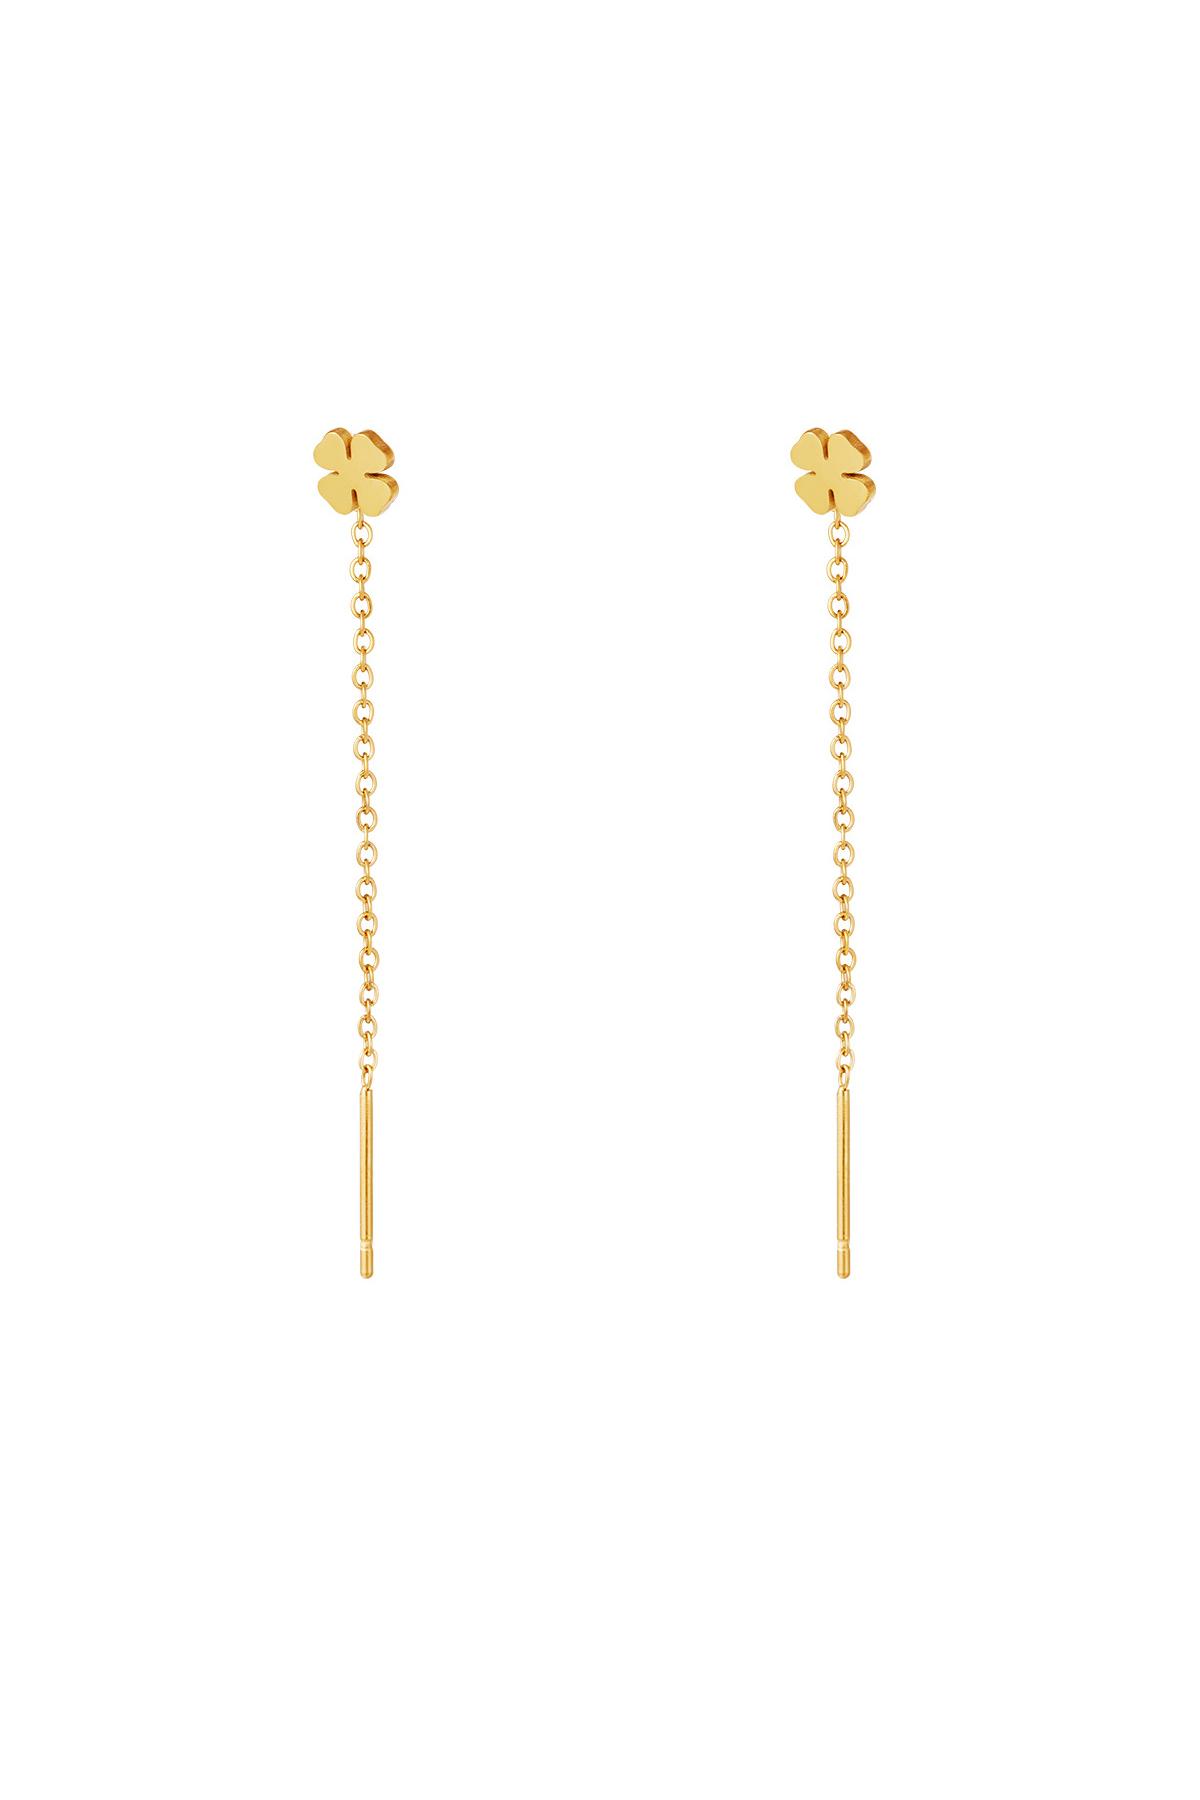 Gold / Stainless Steel Chain Earrings Clover Gold 